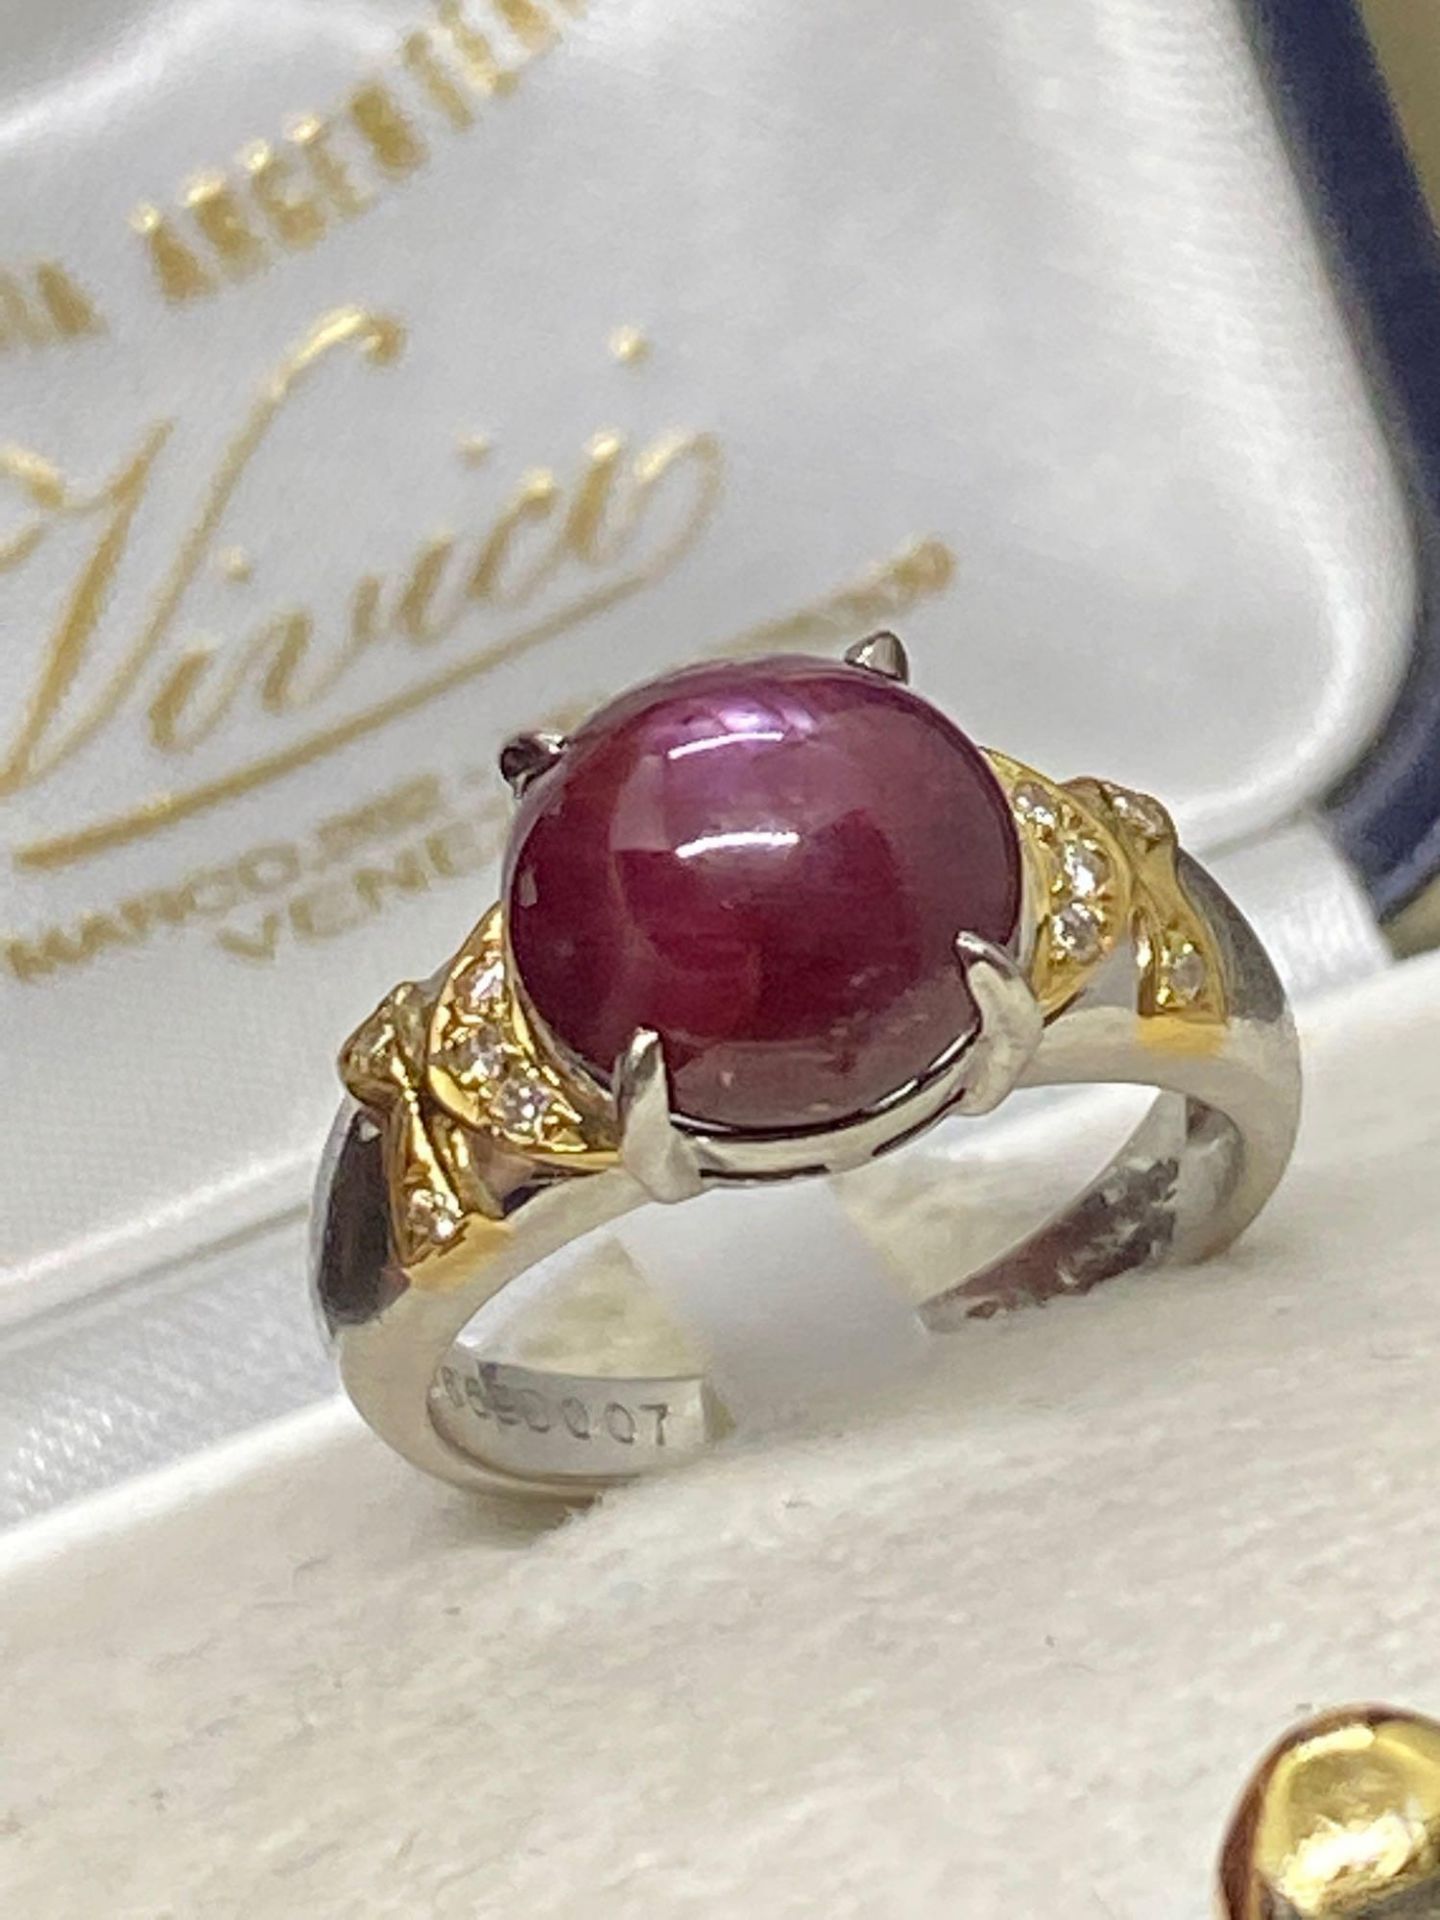 Platinum & 18ct Gold 3.00ct Star Ruby & Diamond Ring - 6.7 Grams - Approx Size L